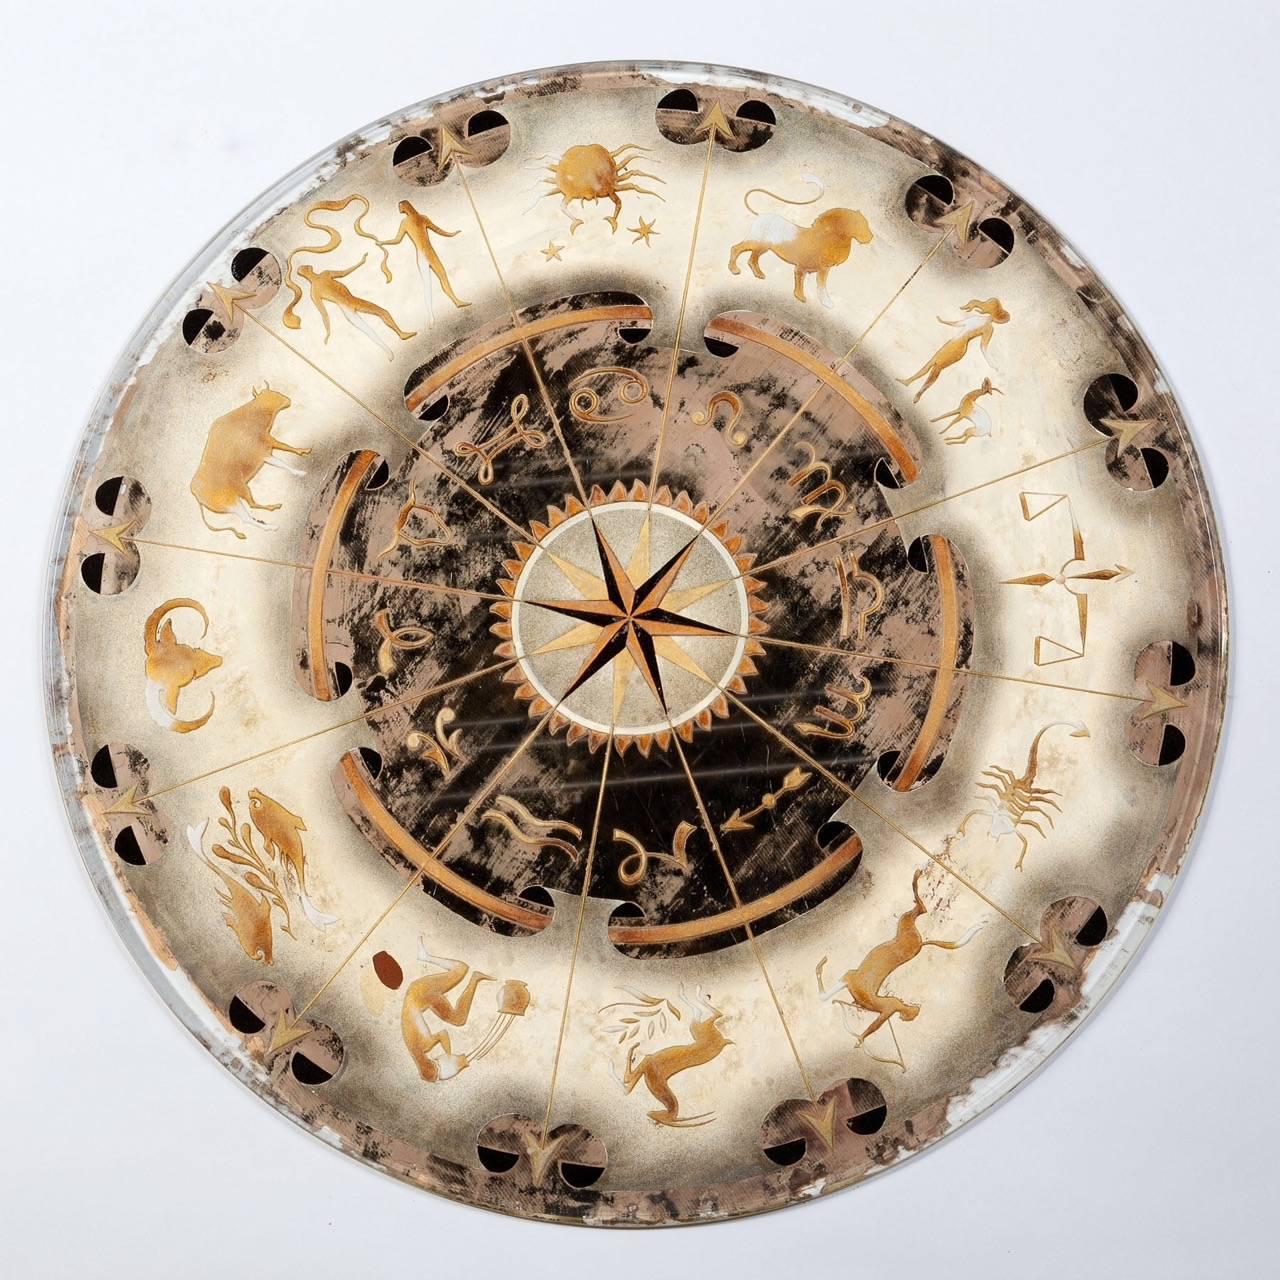 France, circa 1945.

Decorated in white and gold with deep engraving, depicting fantastical variants on the traditional representations of the signs of the zodiac.
​
Diameter 28in (72cm).
Pierre Lardin 1902-1982.
His work can be seen in:
The